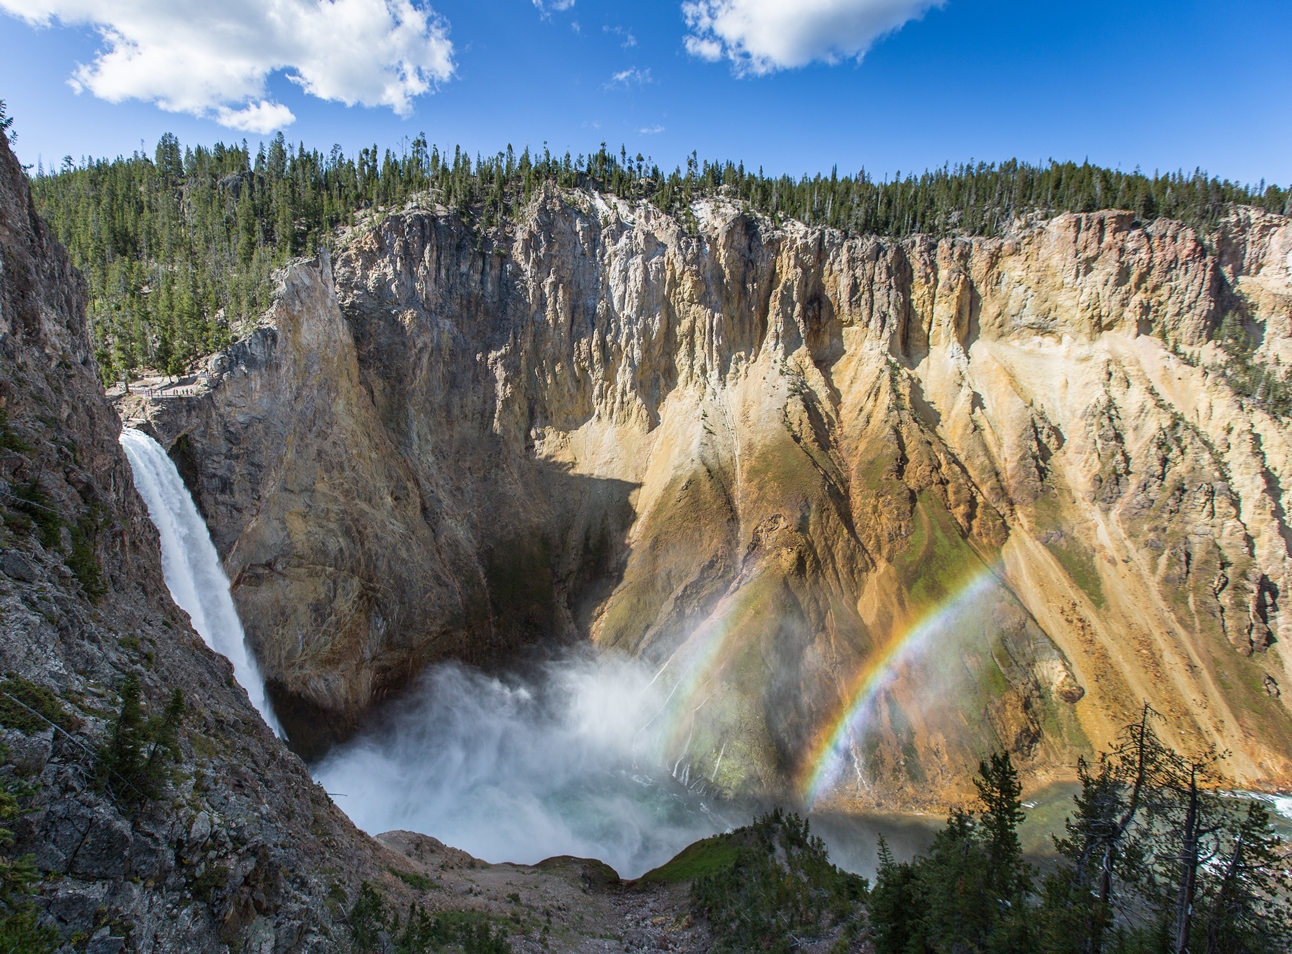 yellowstone_Double rainbow and Lower Falls from Uncle Toms Trail_credit Neal Herbert